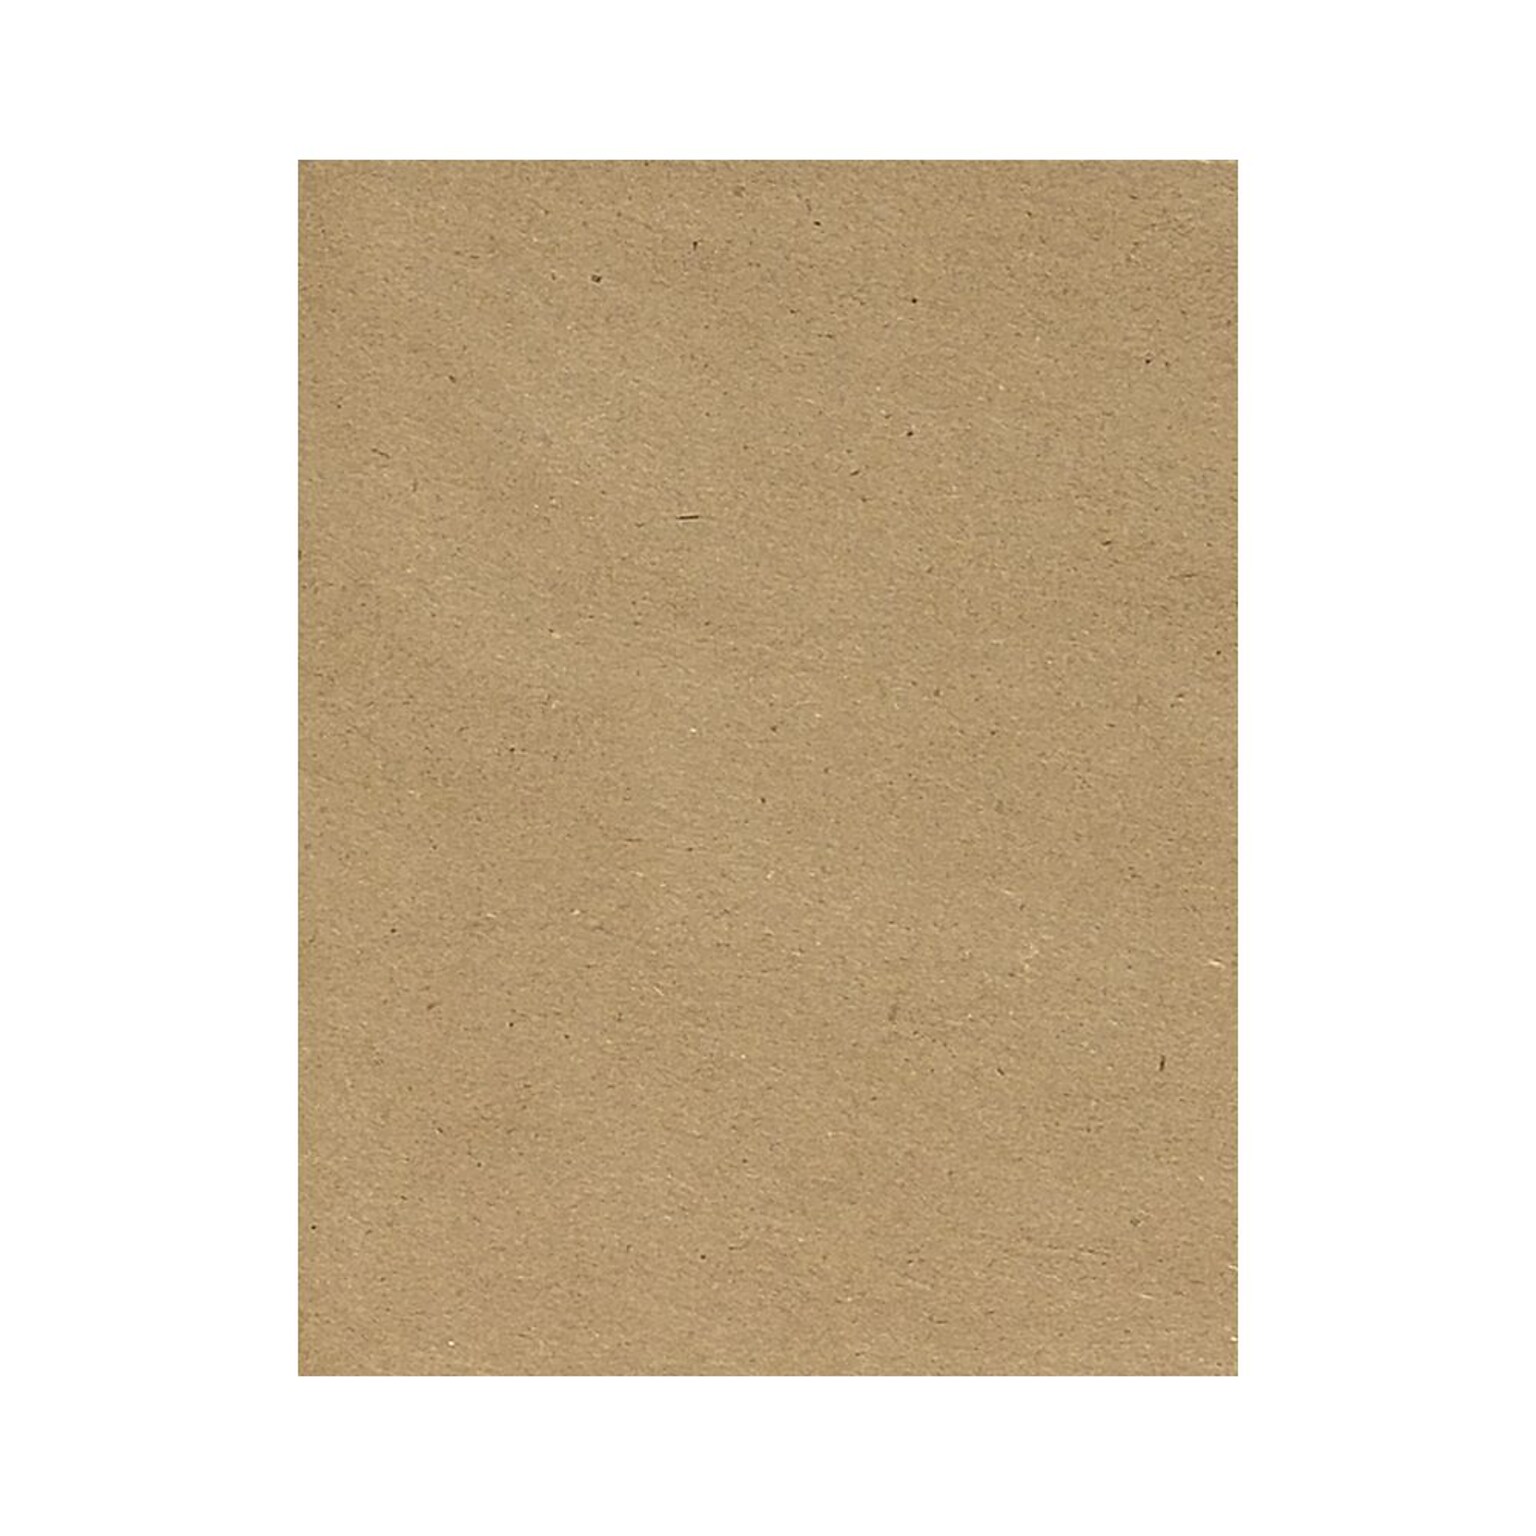 Lux Cardstock 8.5 x 11 inch, Grocery Bag 500/Pack